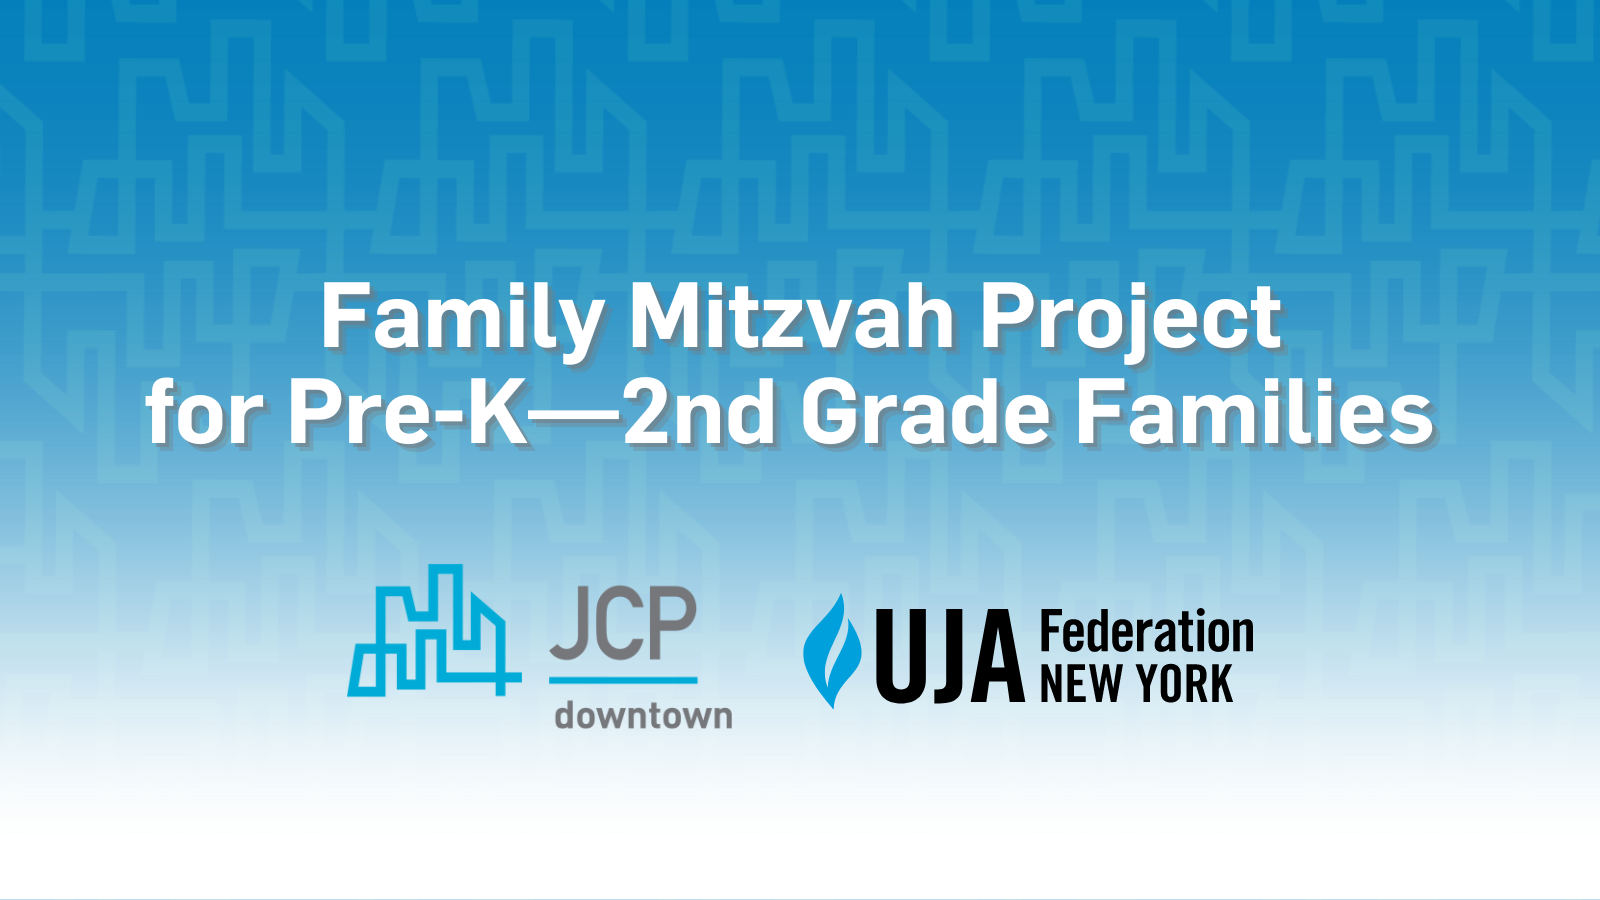 Family Mitzvah Project for Pre-K—2nd Grade Families